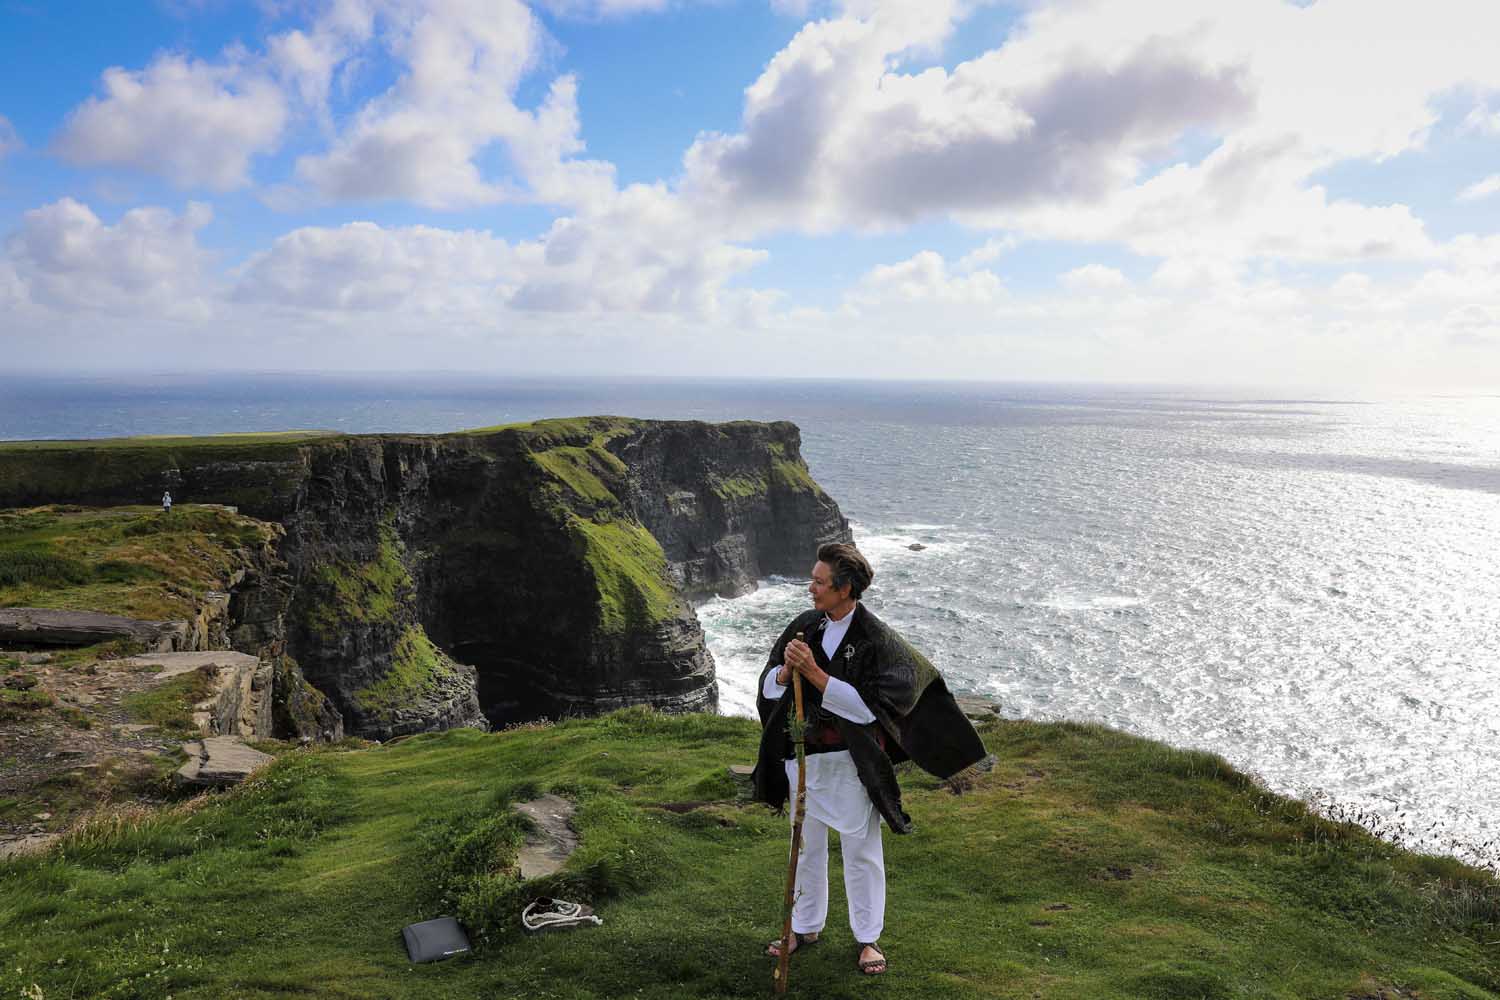 Wedding celebrant photographed at the Cliffs of Moher